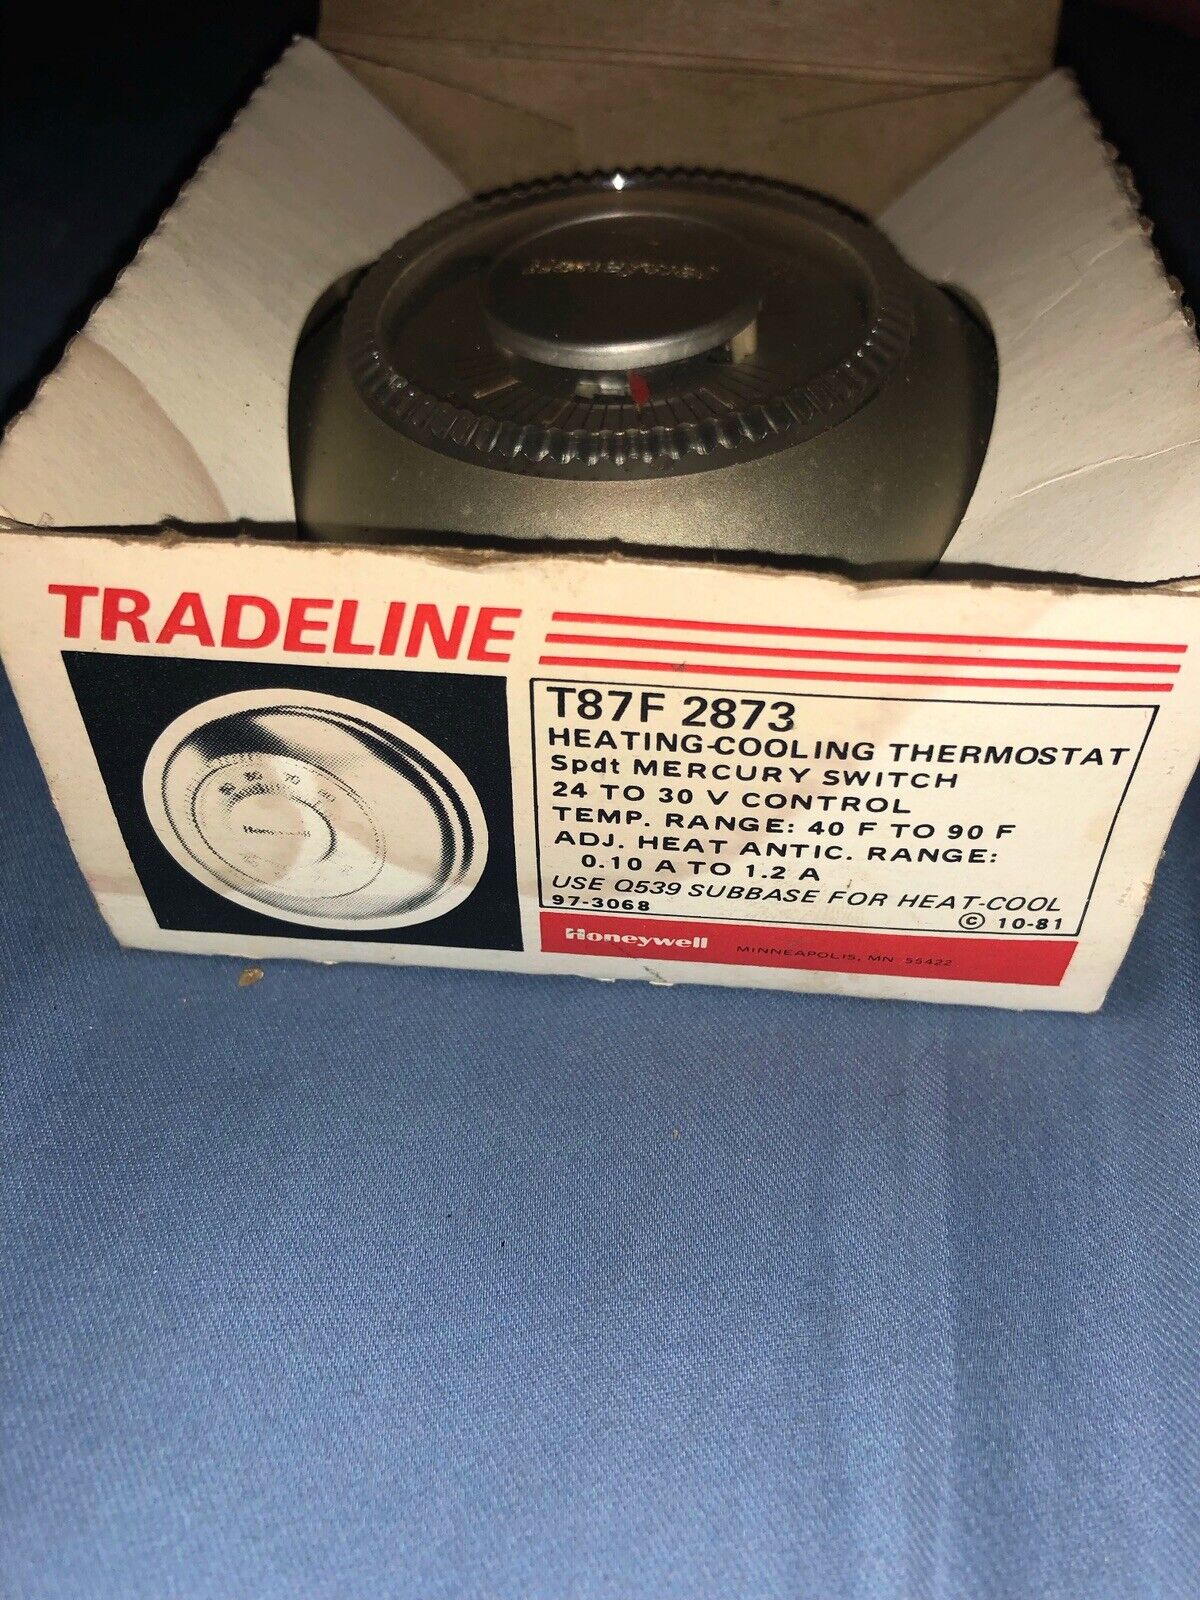 NOS Vintage Honeywell Round T87F 2873 Analog Heating Cooling Thermostat